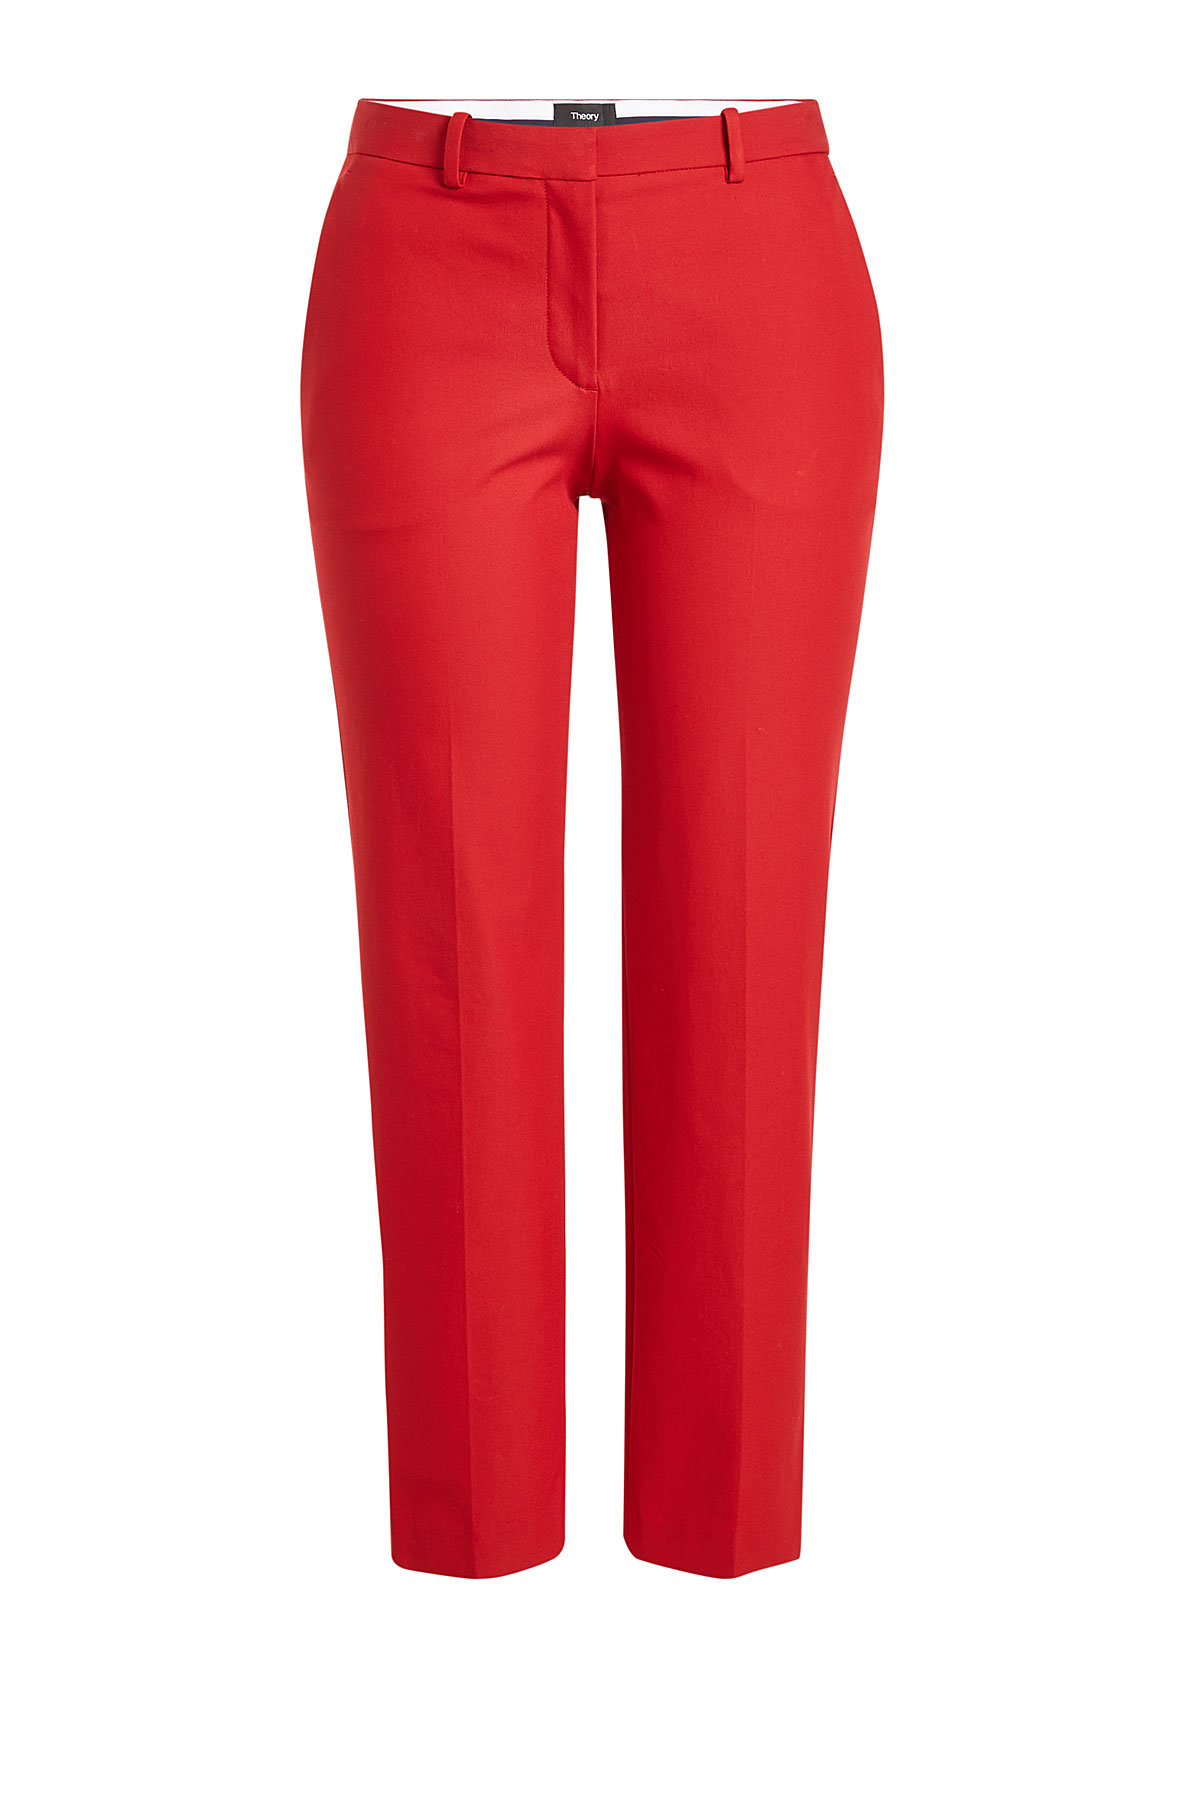 Theory - Hartsdale Cropped Pants with Cotton